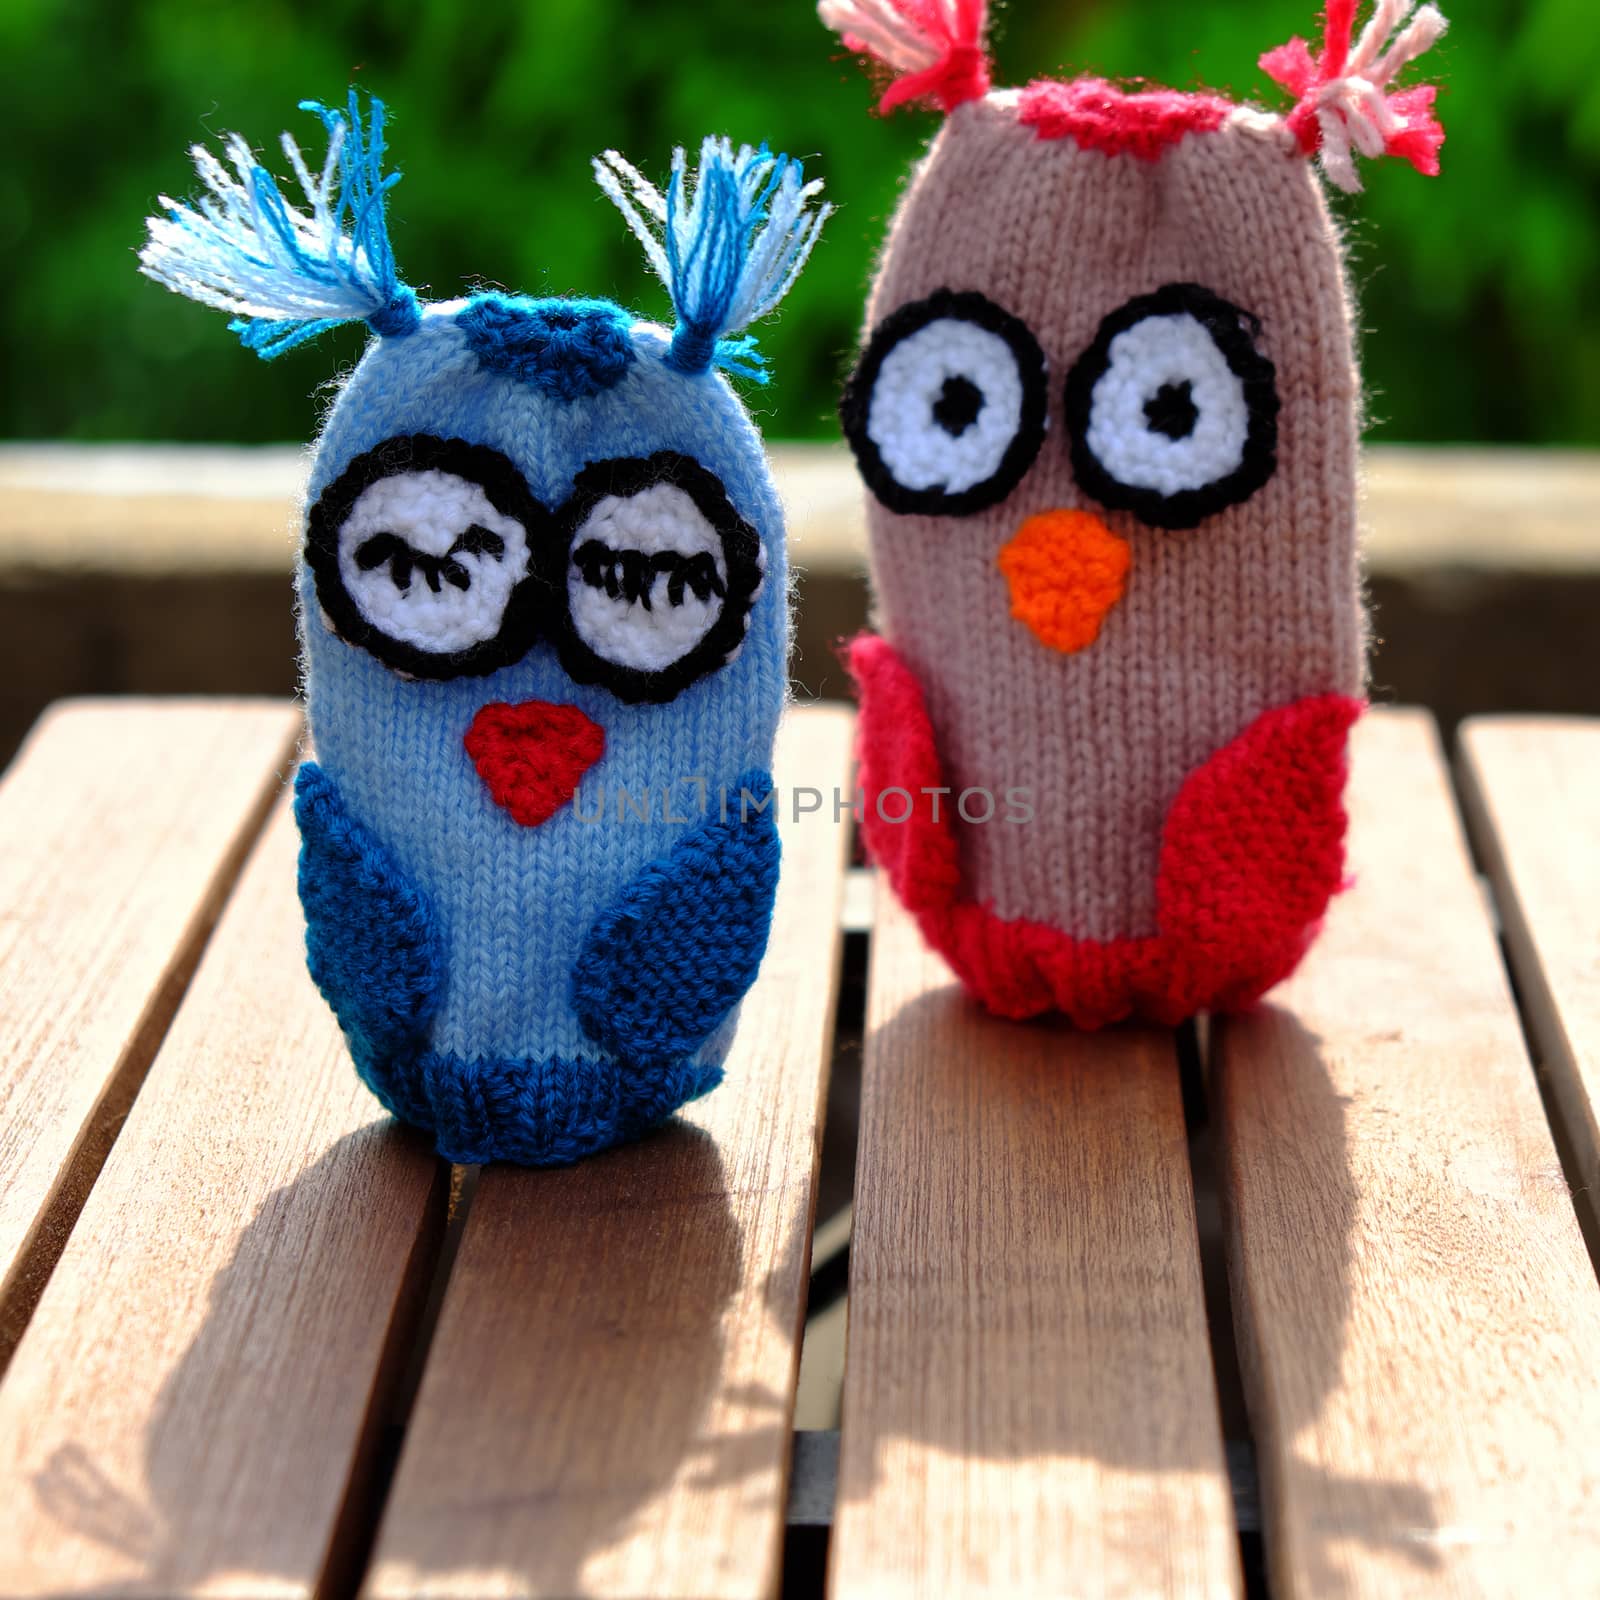 Hand puppets for children day, colorful owl puppet knit from yarn, diy toy on outdoor green background